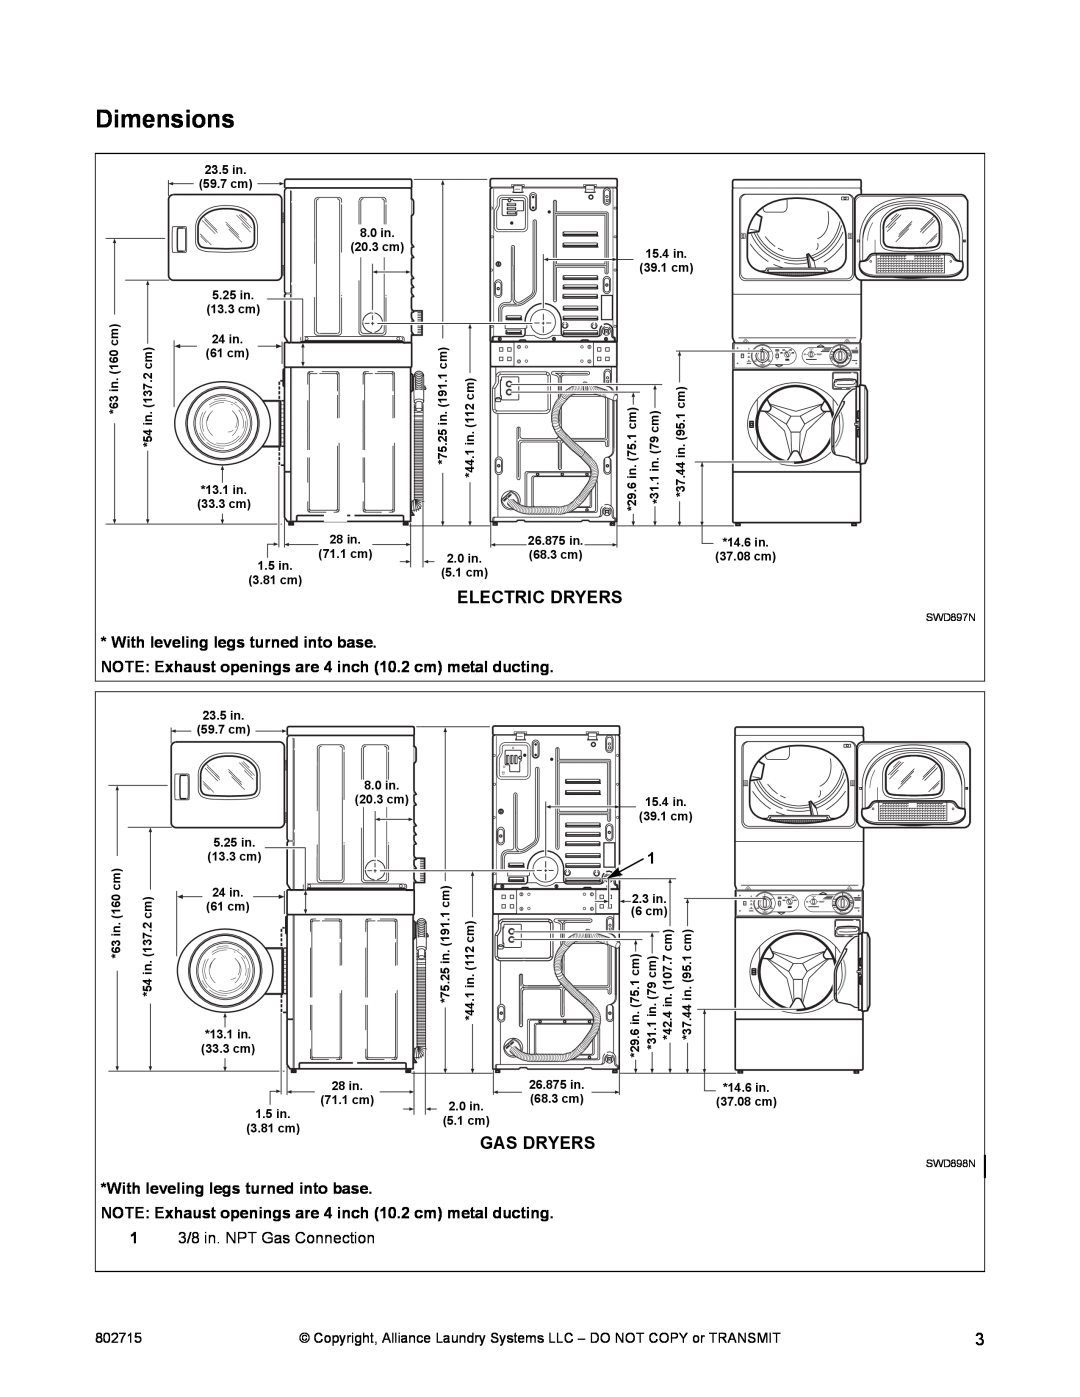 Alliance Laundry Systems Dishwasher manual Dimensions, Electric Dryers, Gas Dryers, 1 3/8 in. NPT Gas Connection, 802715 